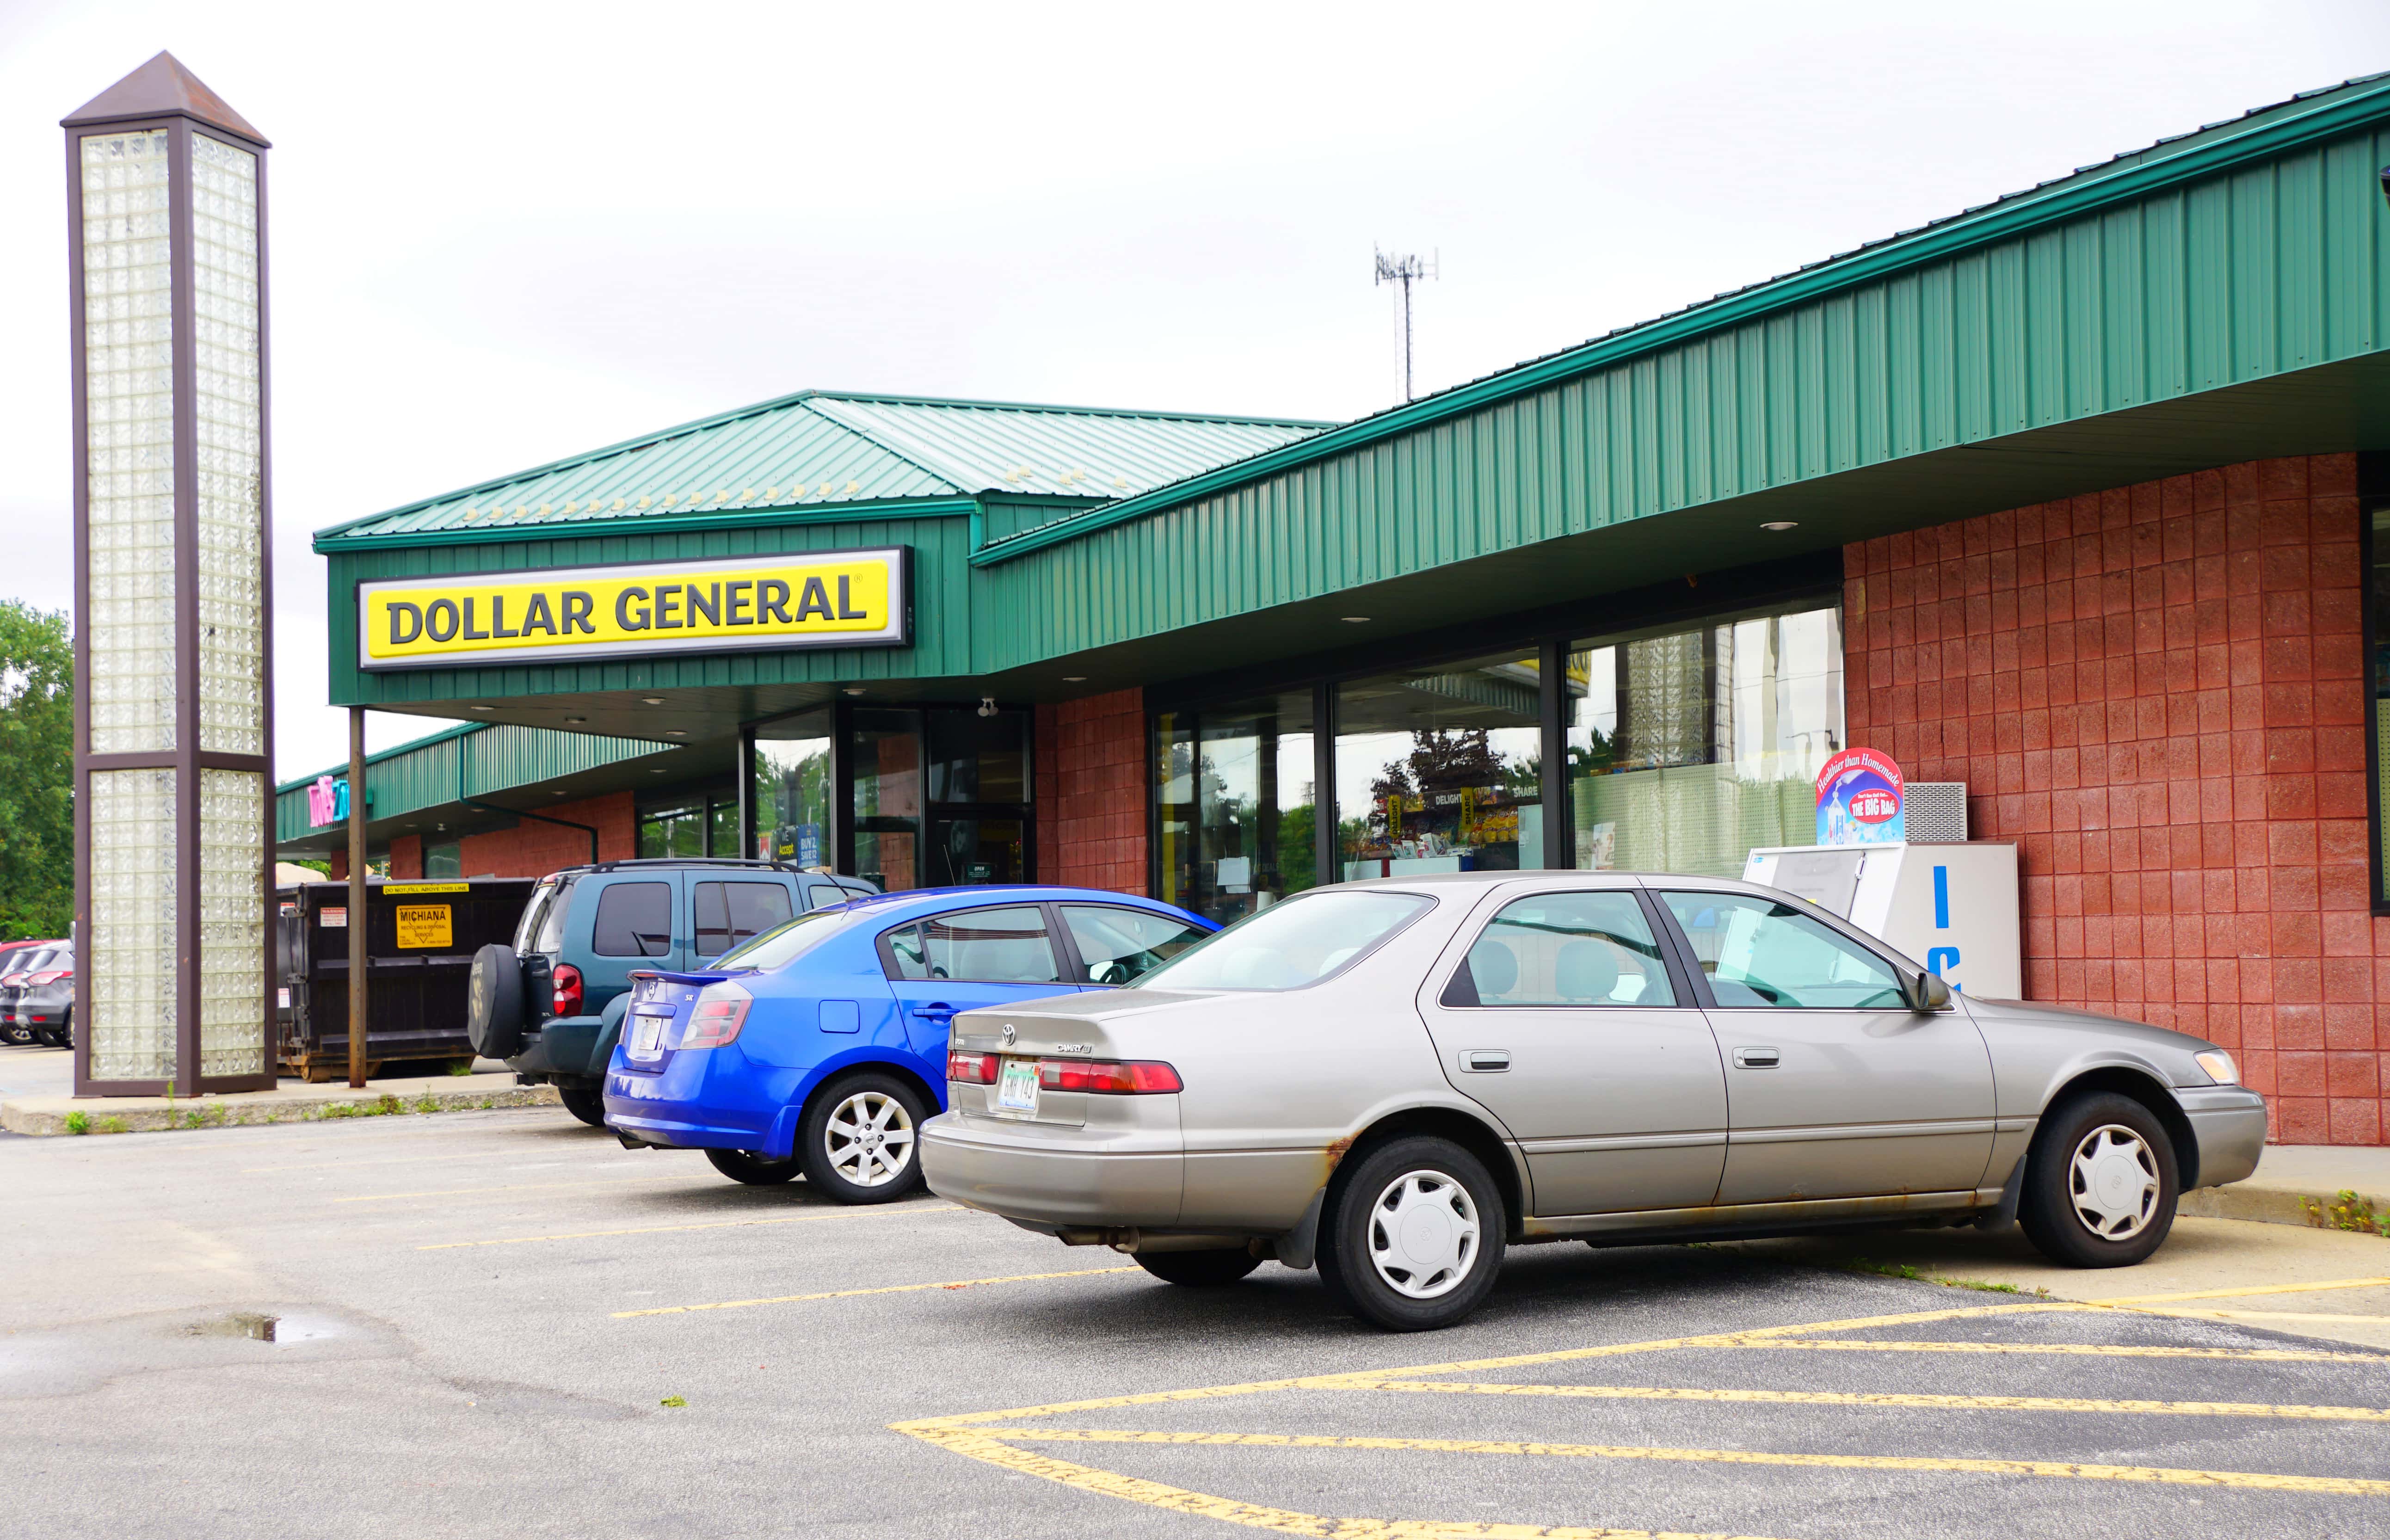 dollar-general-returns-to-st-joe-after-four-year-absence-moody-on